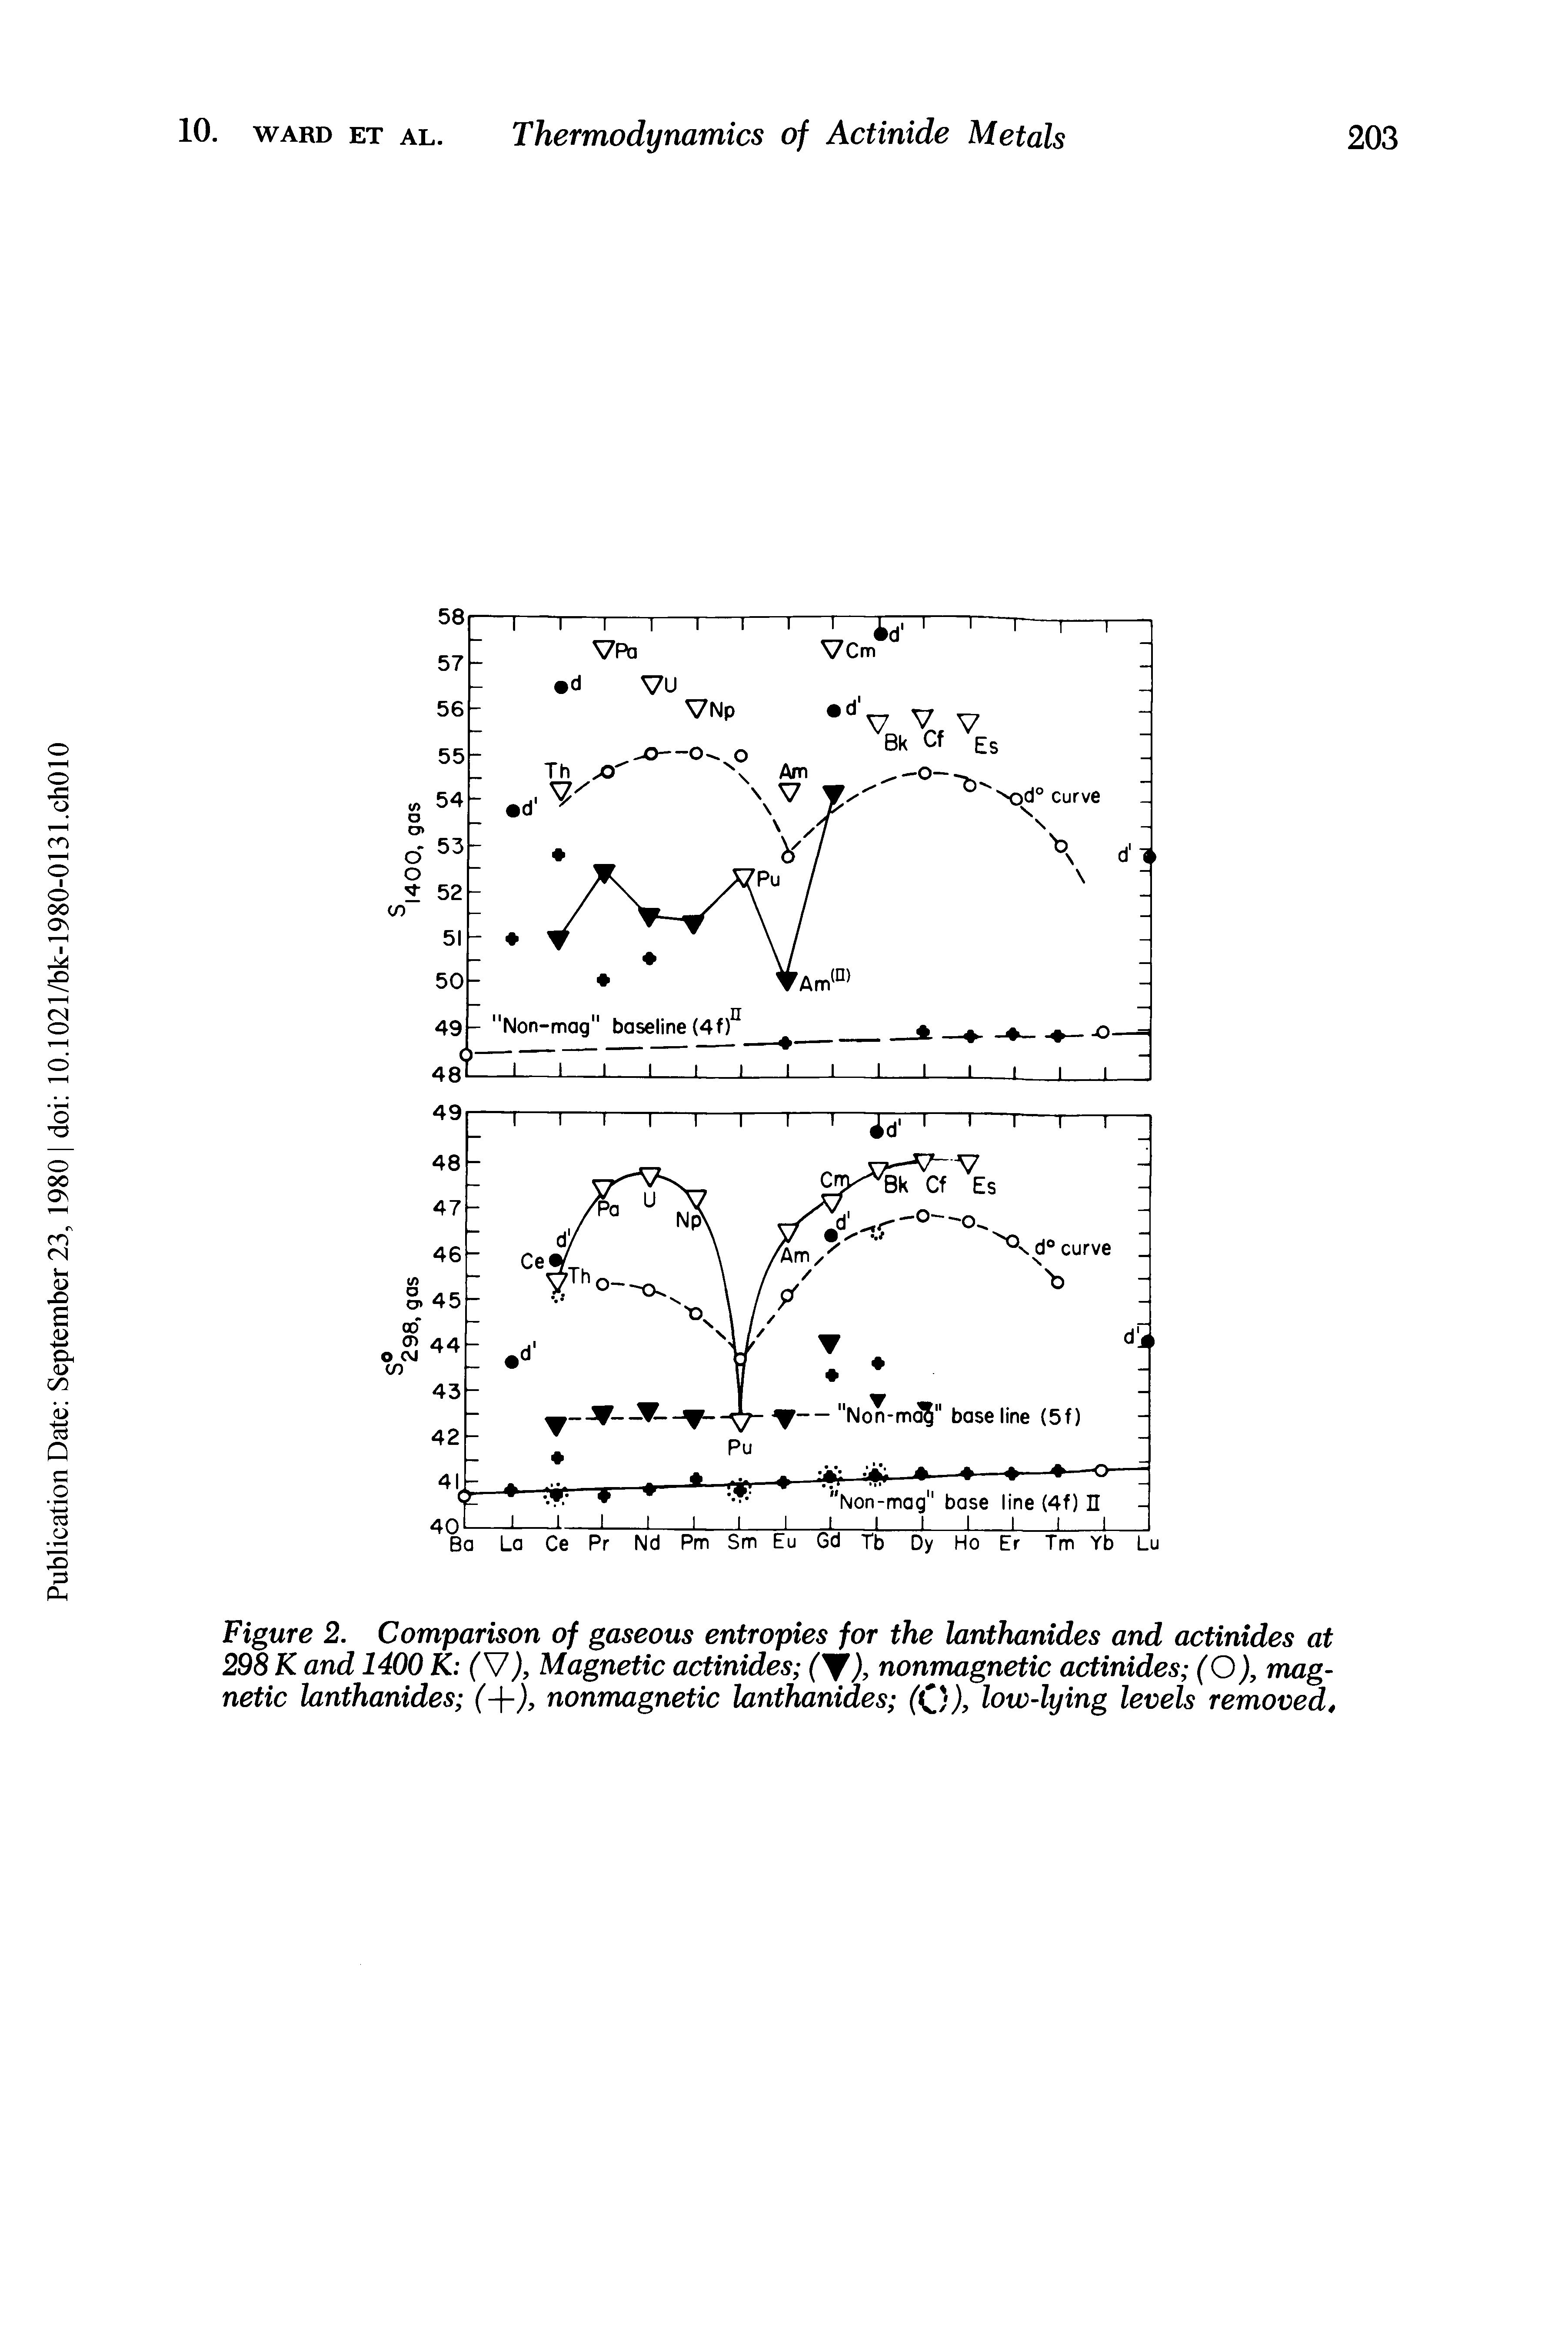 Figure 2. Comparison of gaseous entropies for the lanthanides and actinides at 298 K and 1400 K (V), Magnetic actinides (Y), nonmagnetic actinides (O), magnetic lanthanides nonmagnetic lanthanides (Q), low-lying levels removed,...